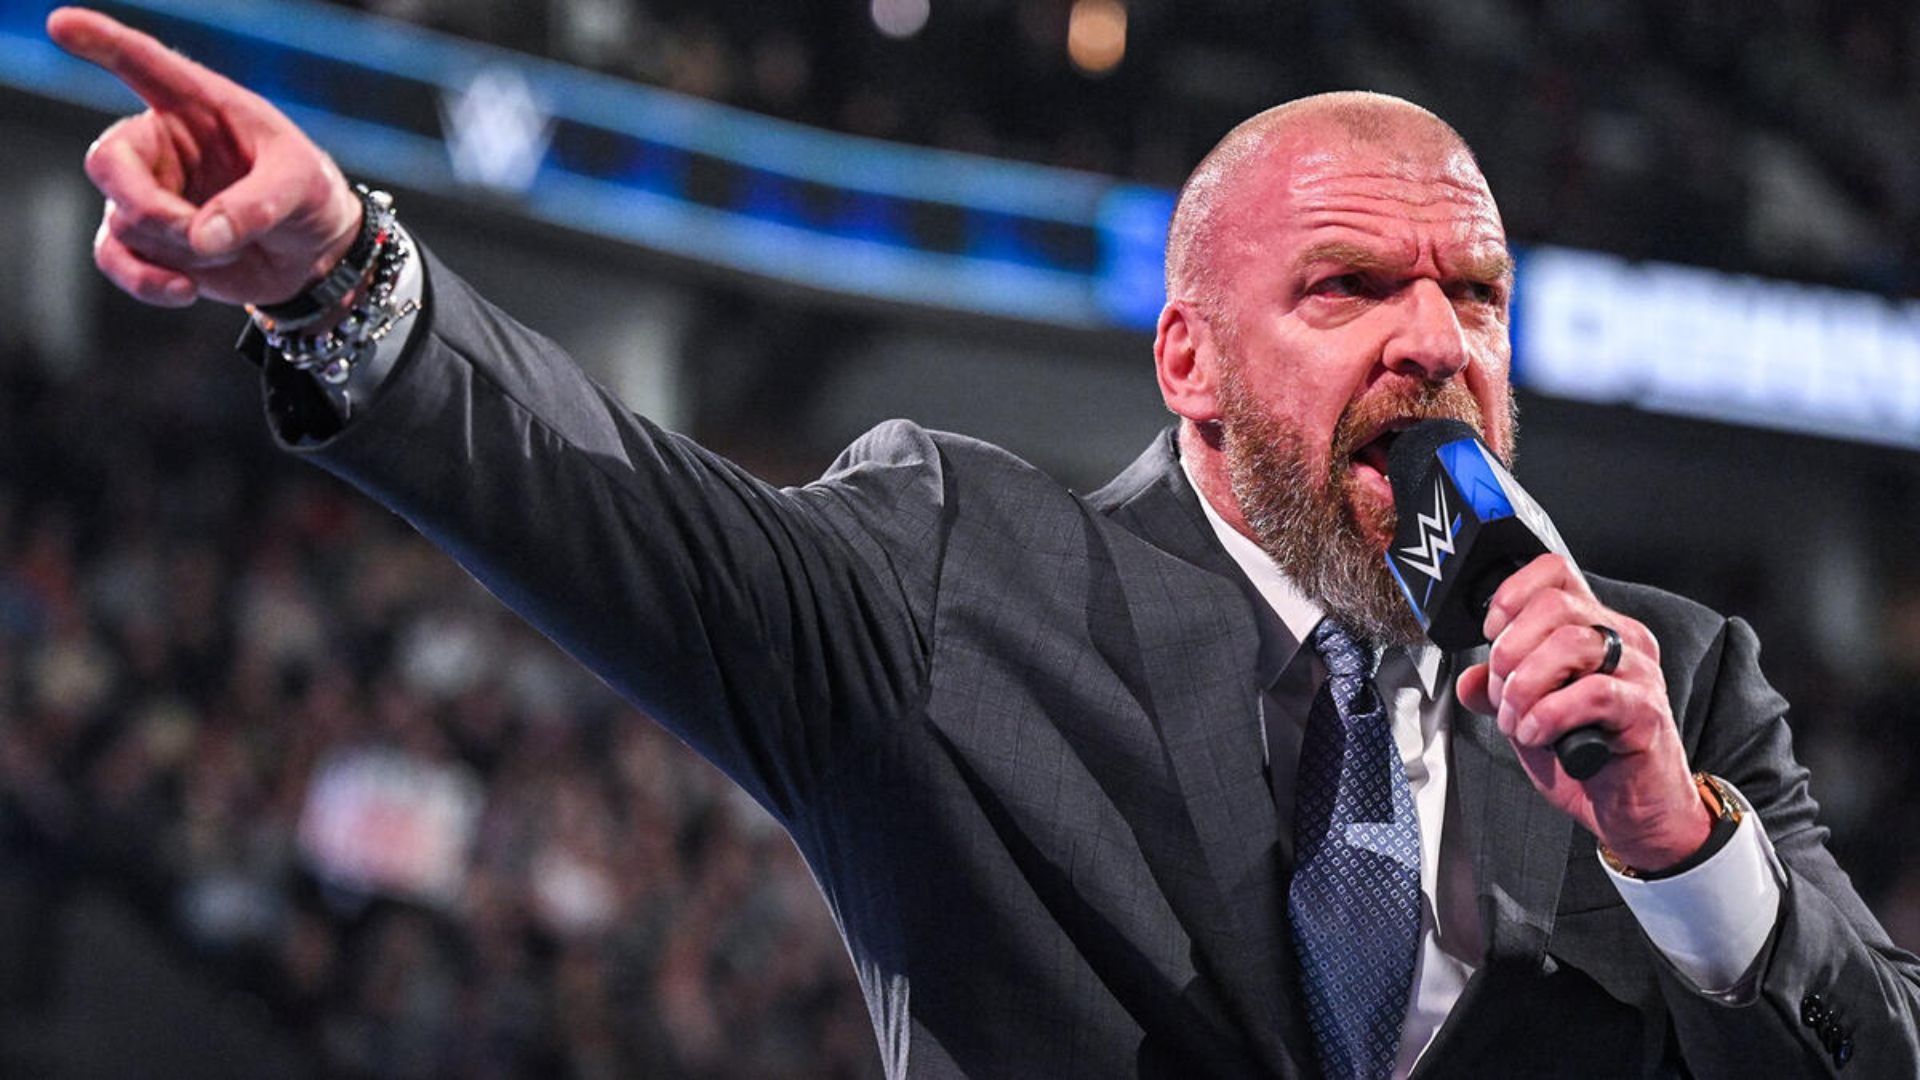 Paul &quot;Triple H&quot; Levesque is the WWE Chief Content Officer (Credit: WWE.com)